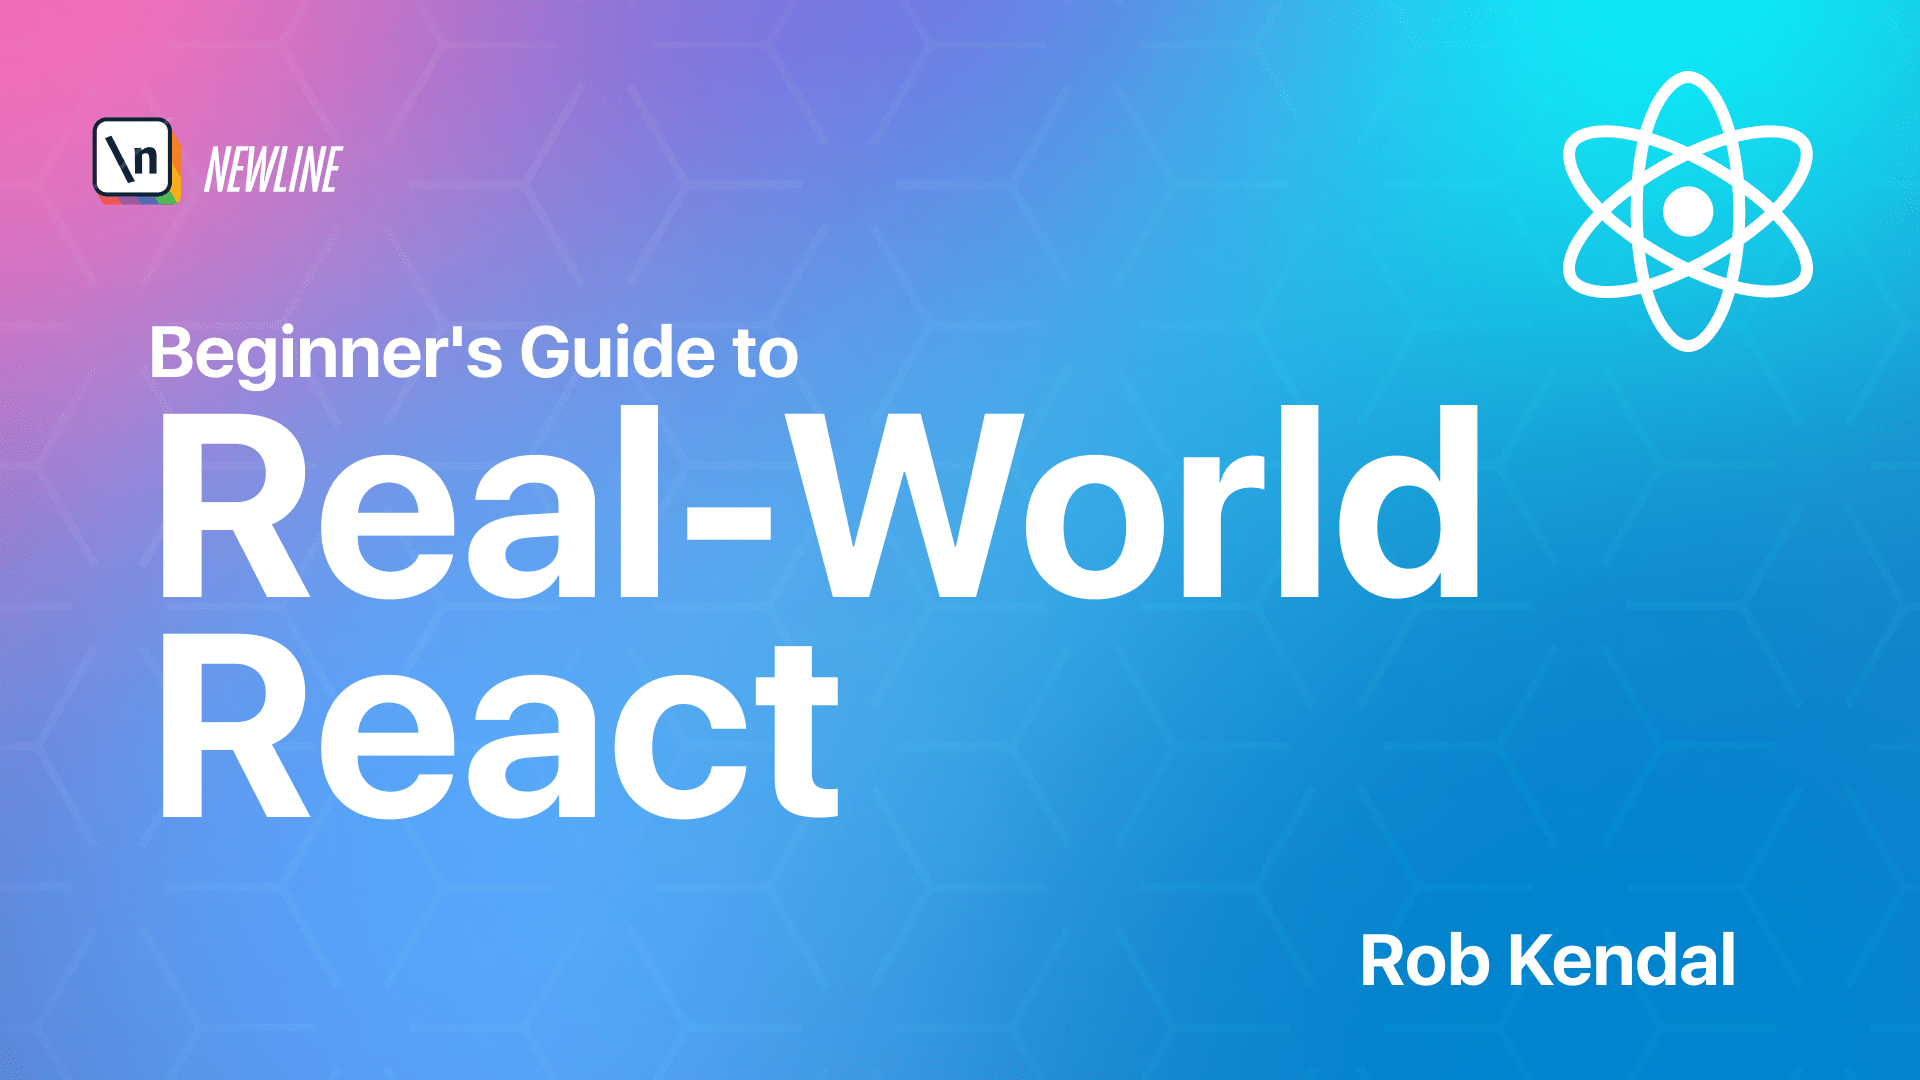 The Beginners Guide to Real-World React course cover